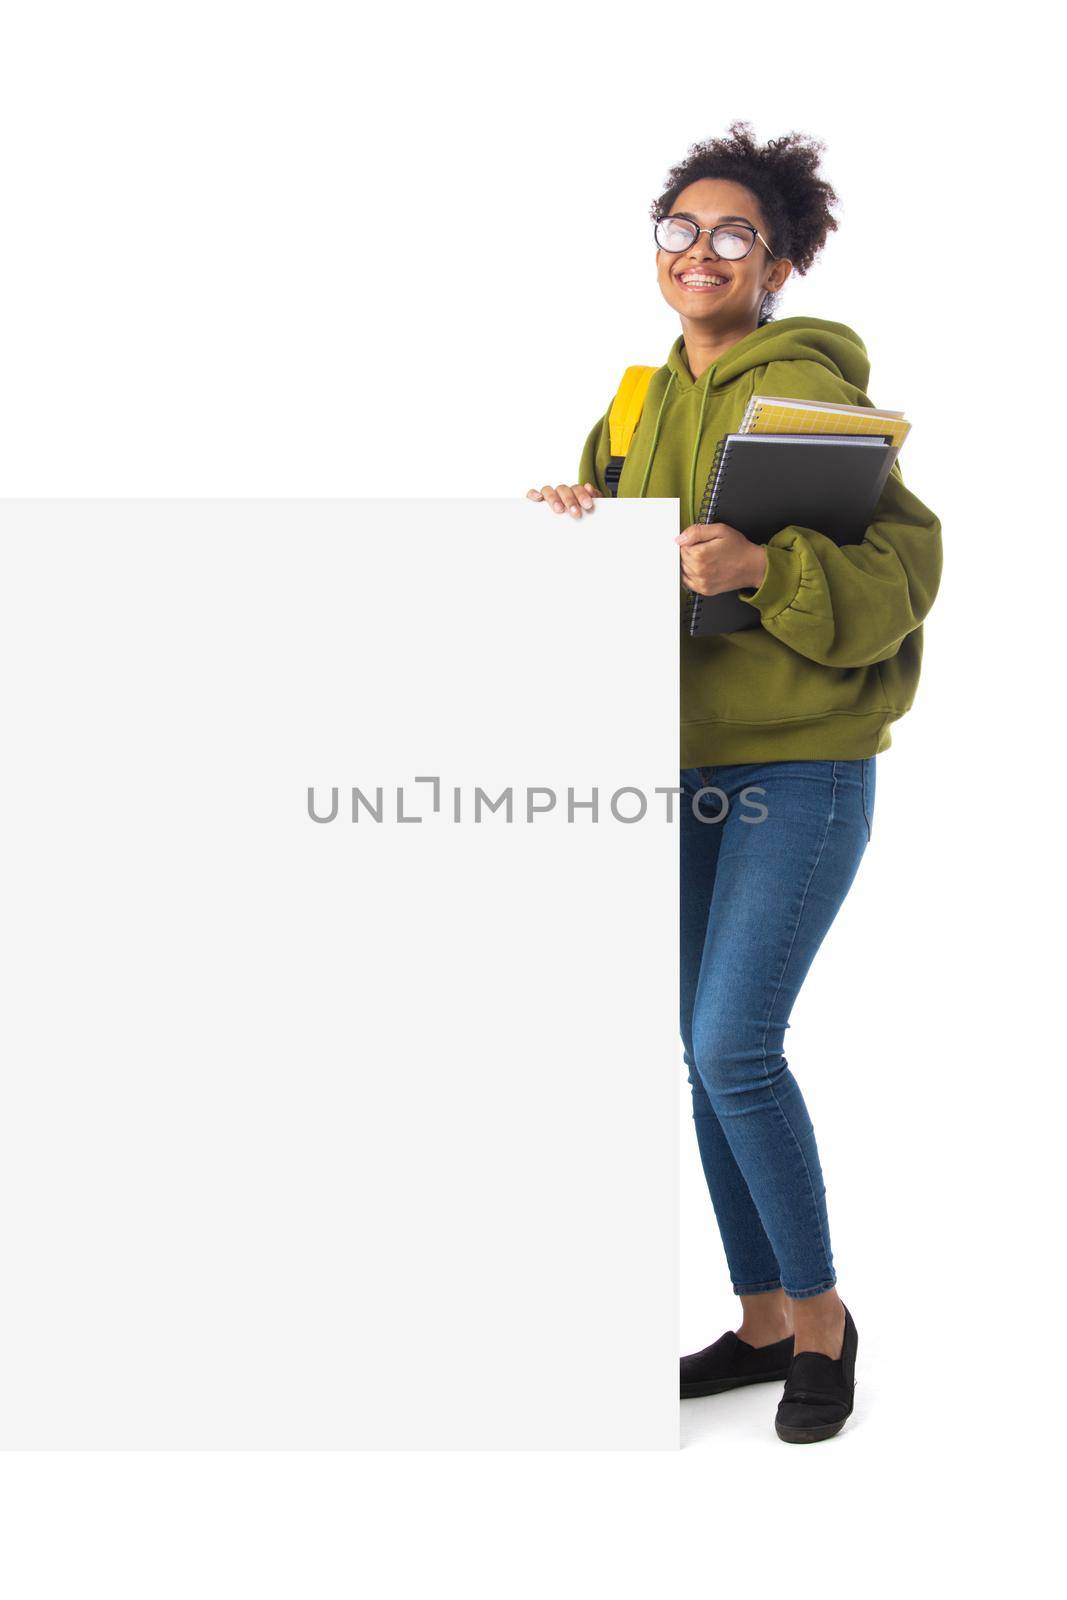 Friendly ethnic black female high school student in eyeglasses with banner and composition book isolated on white background